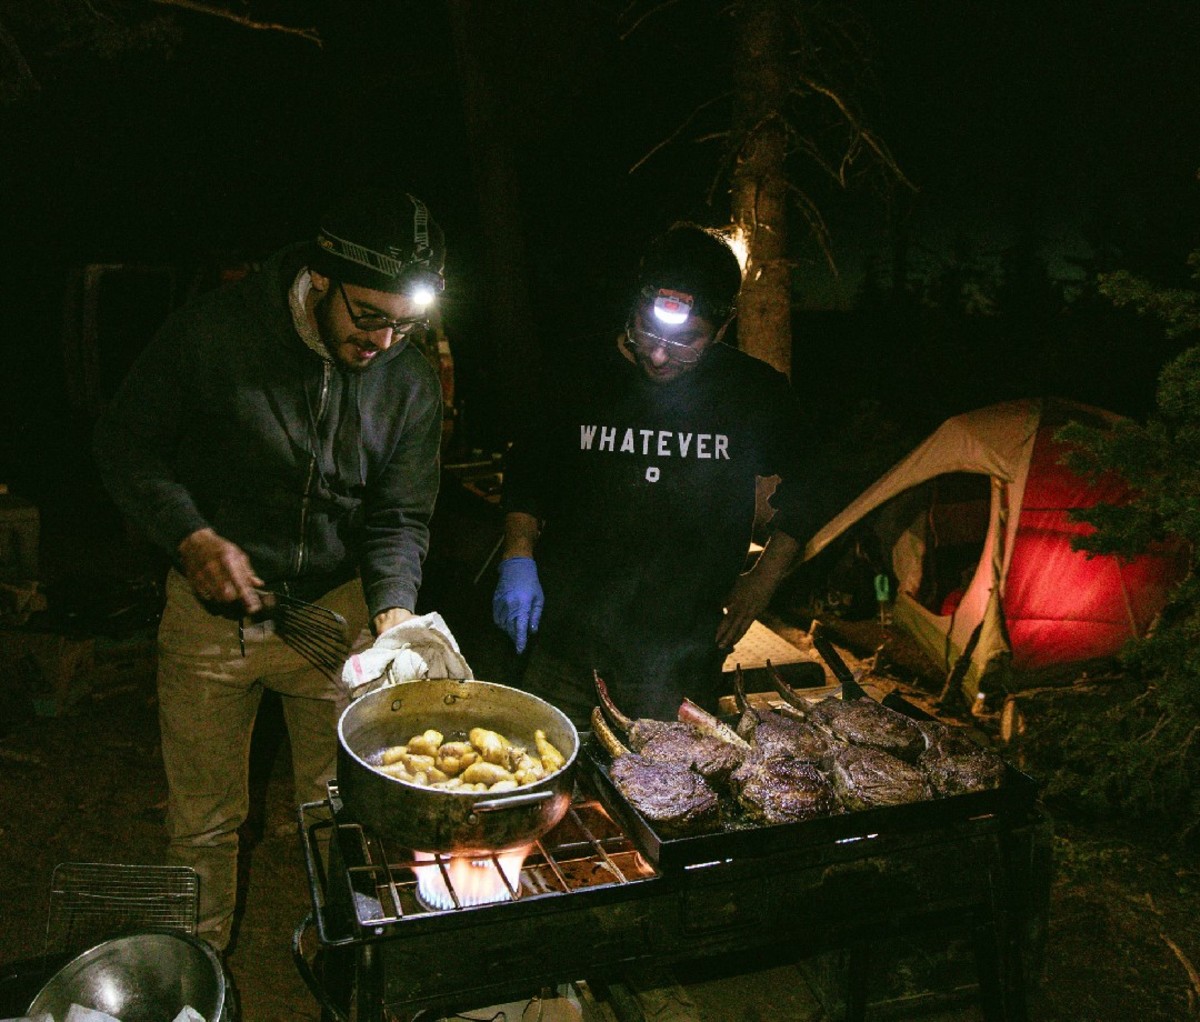 Two men cooking potatoes and steaks with headlamps on in campsite